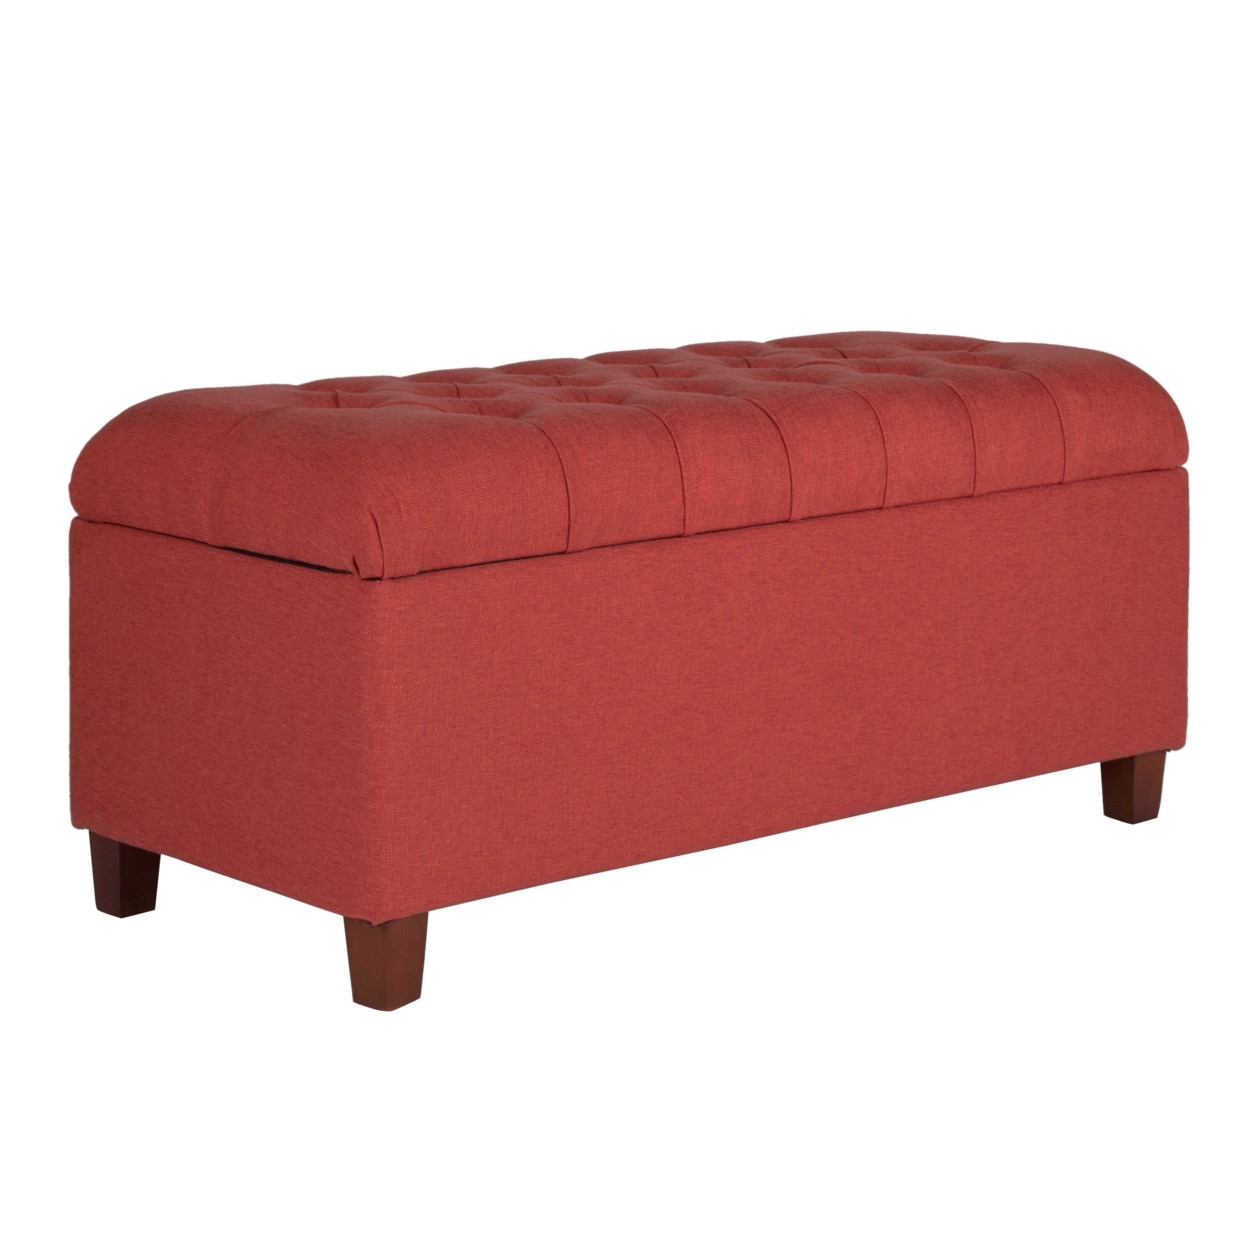 Saltoro Sherpi Fabric Upholstered Button Tufted Wooden Bench With Hinged Storage, Red and Brown